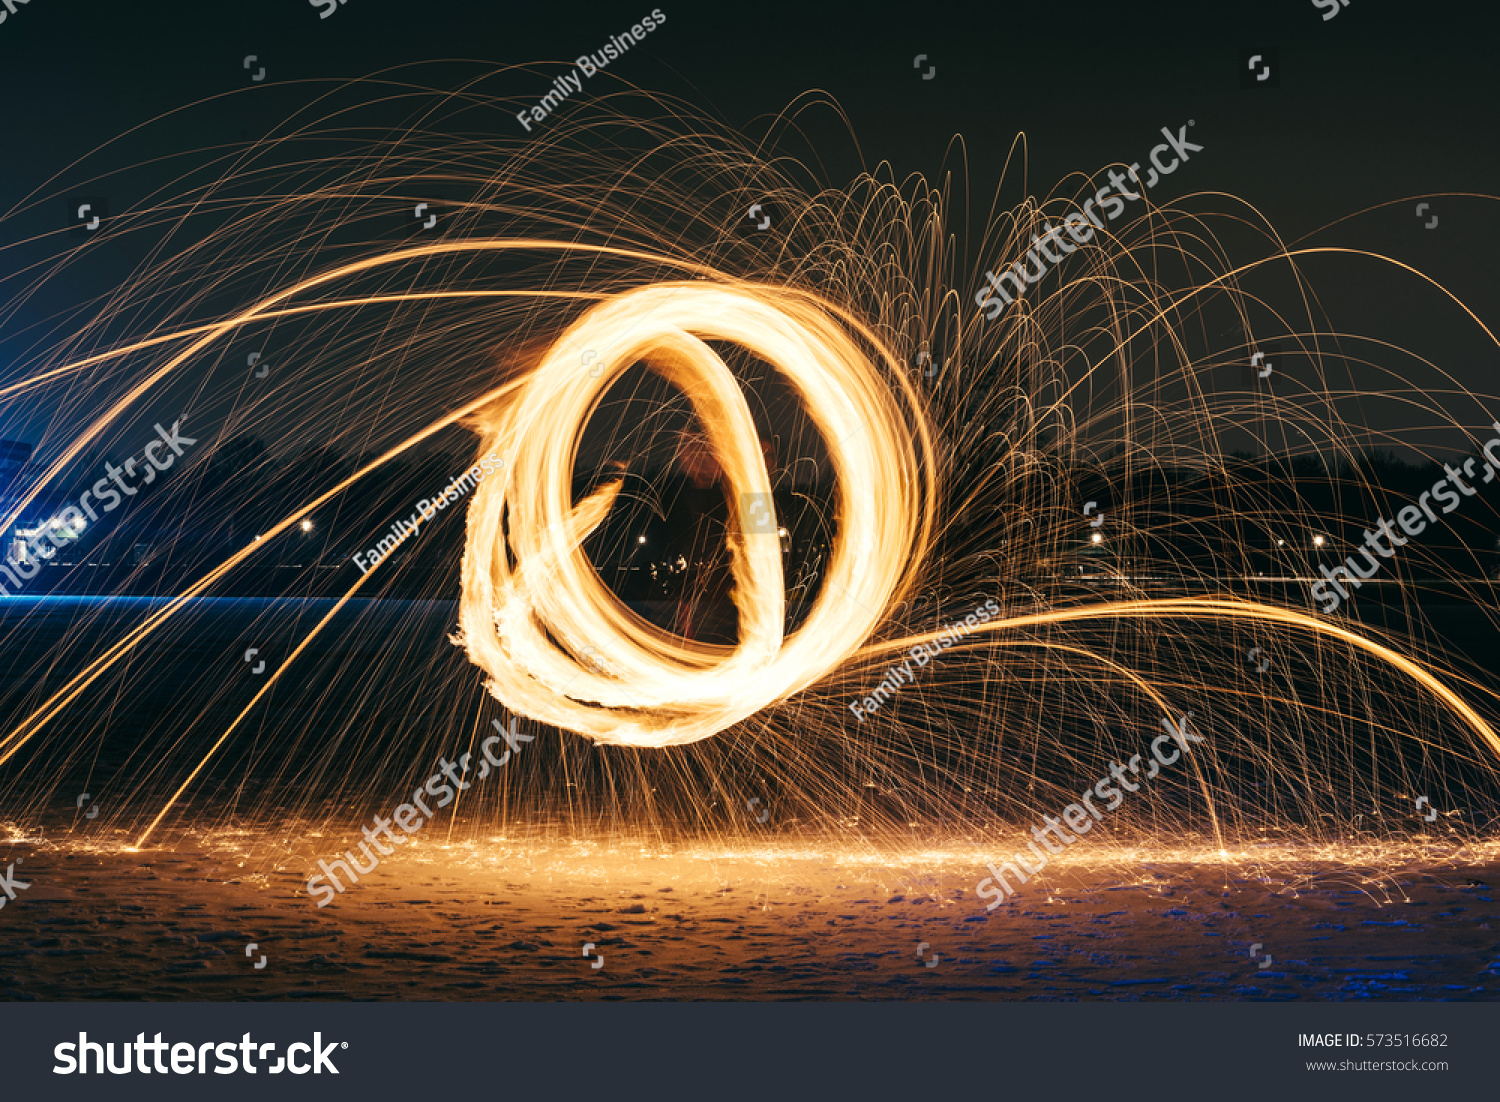 Long exposure photography with the fire ball #573516682